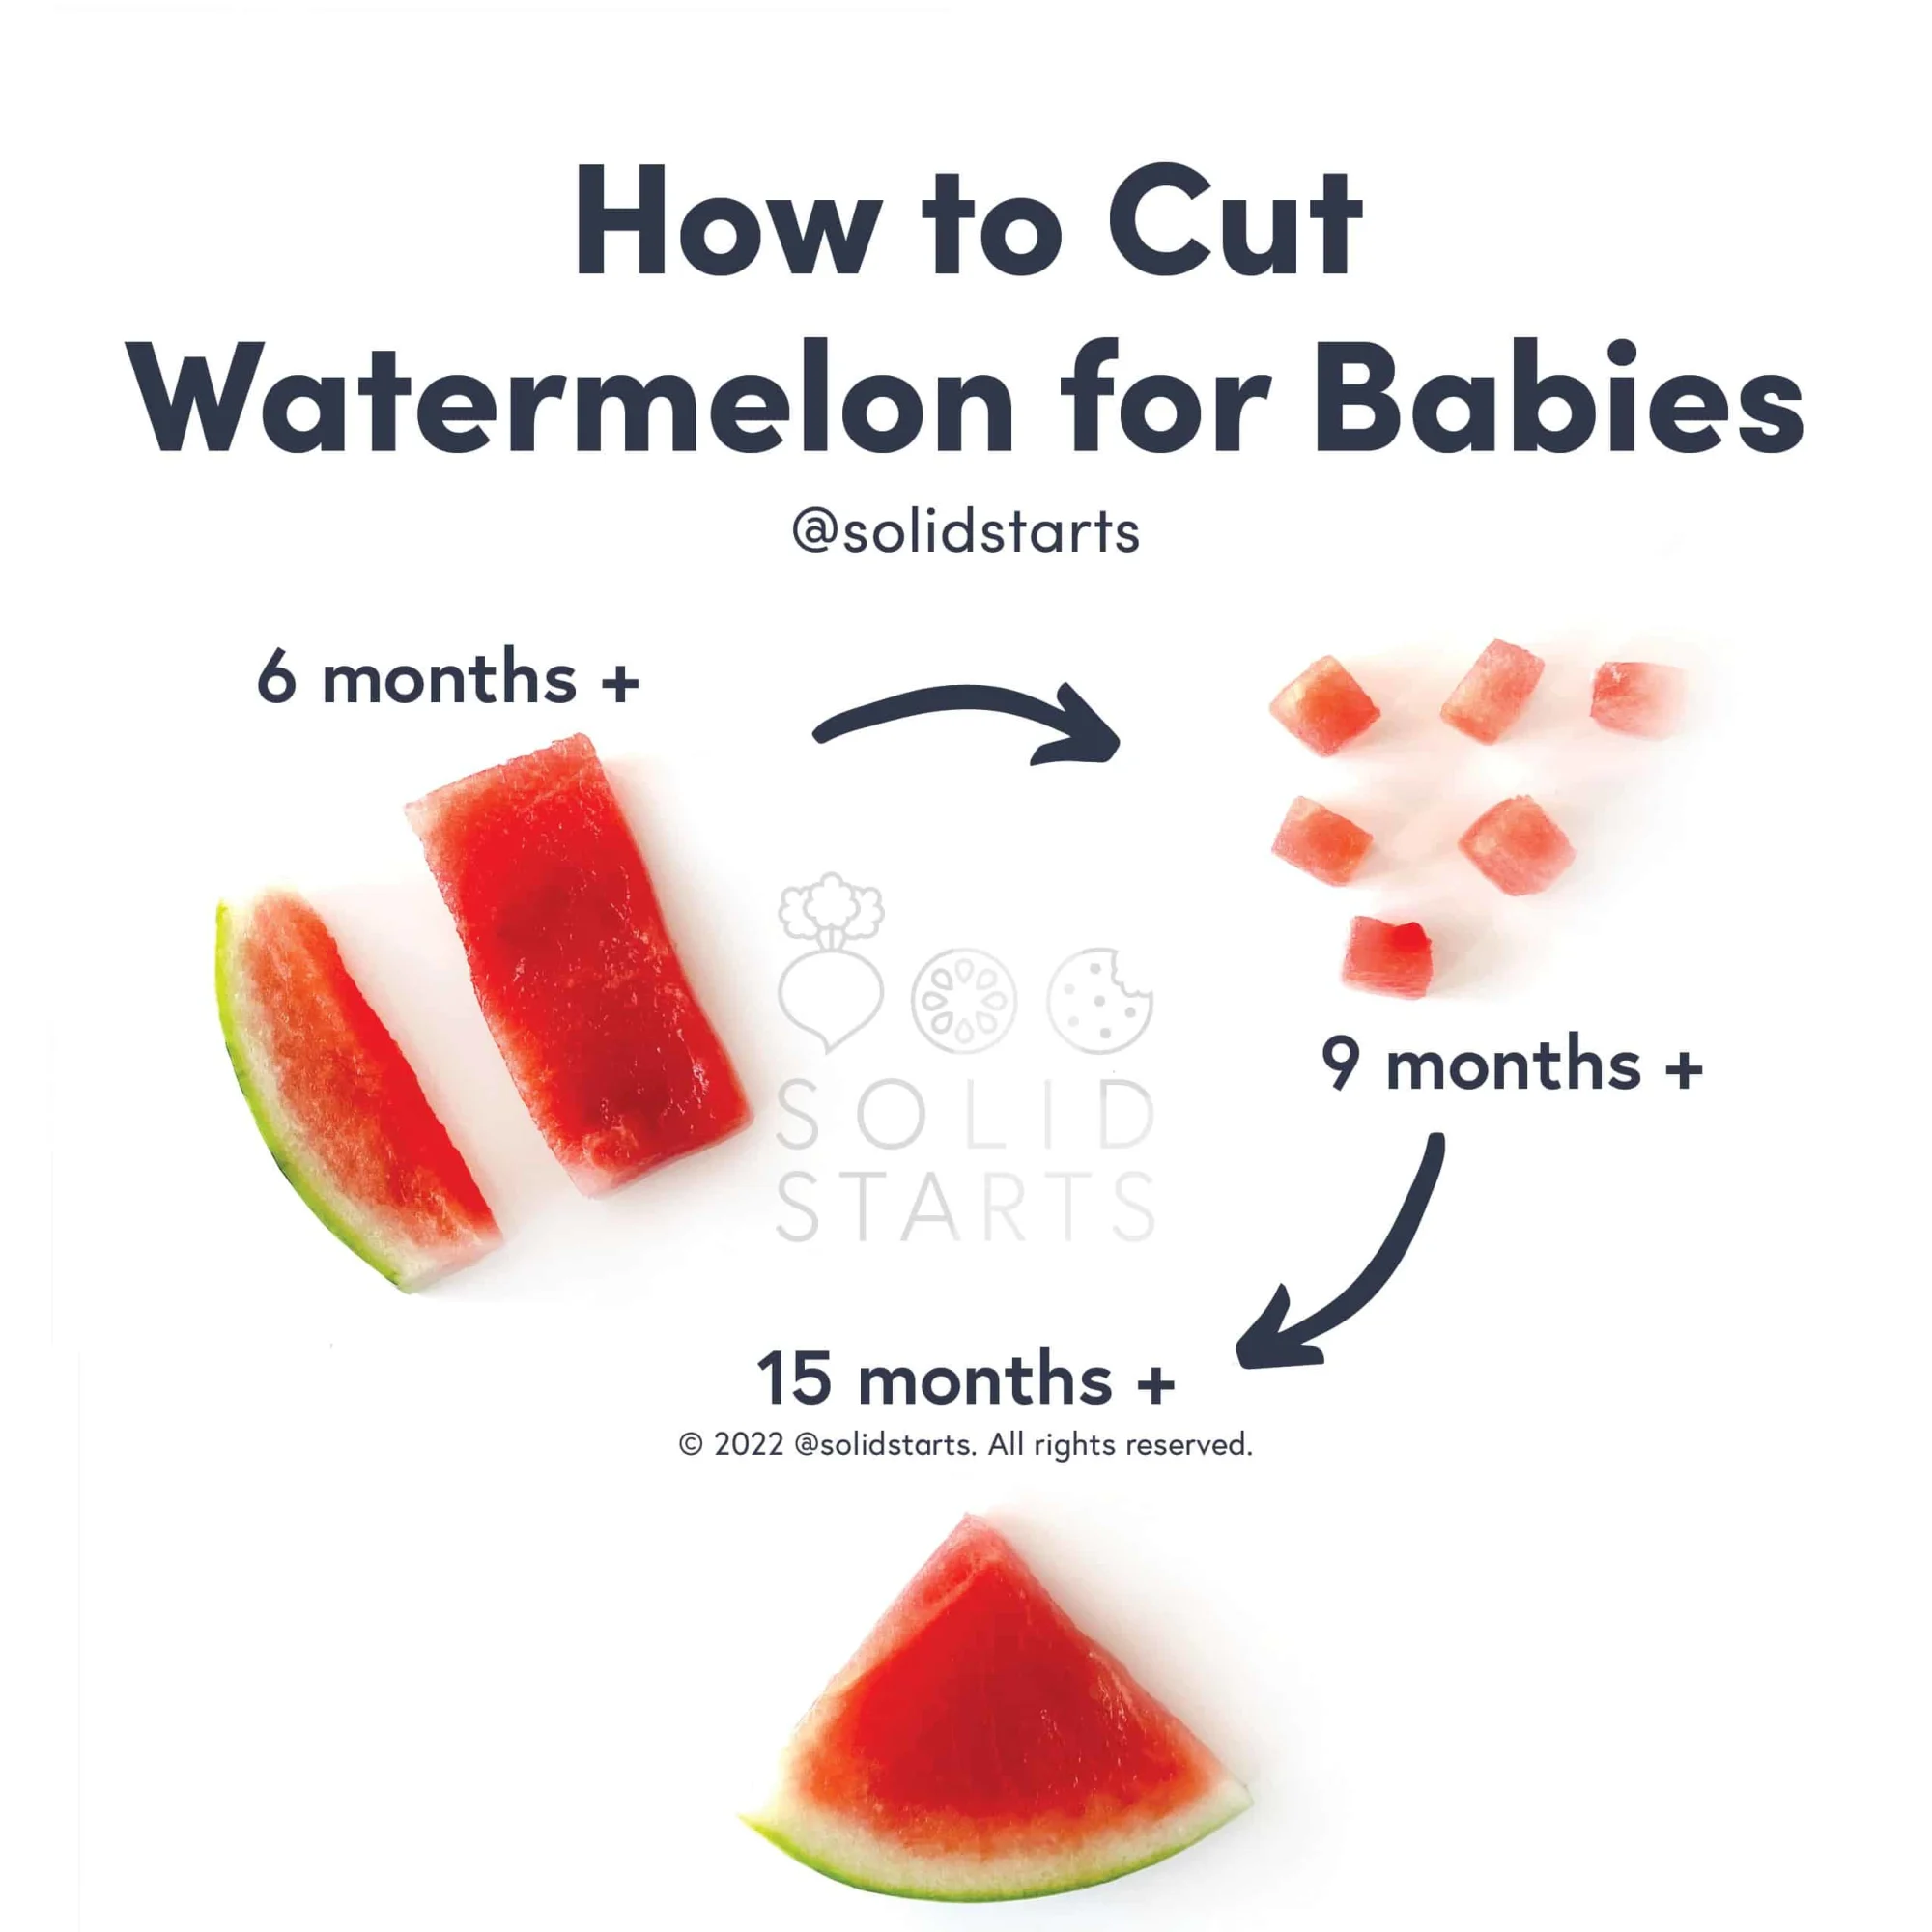 an infographic showing how to cut watermelon by age: a rind teether or small rectangle of the flesh for babies 6 months+, bite-sized pieces for 9 months+, a triangular wedge with rind on for 15 months+